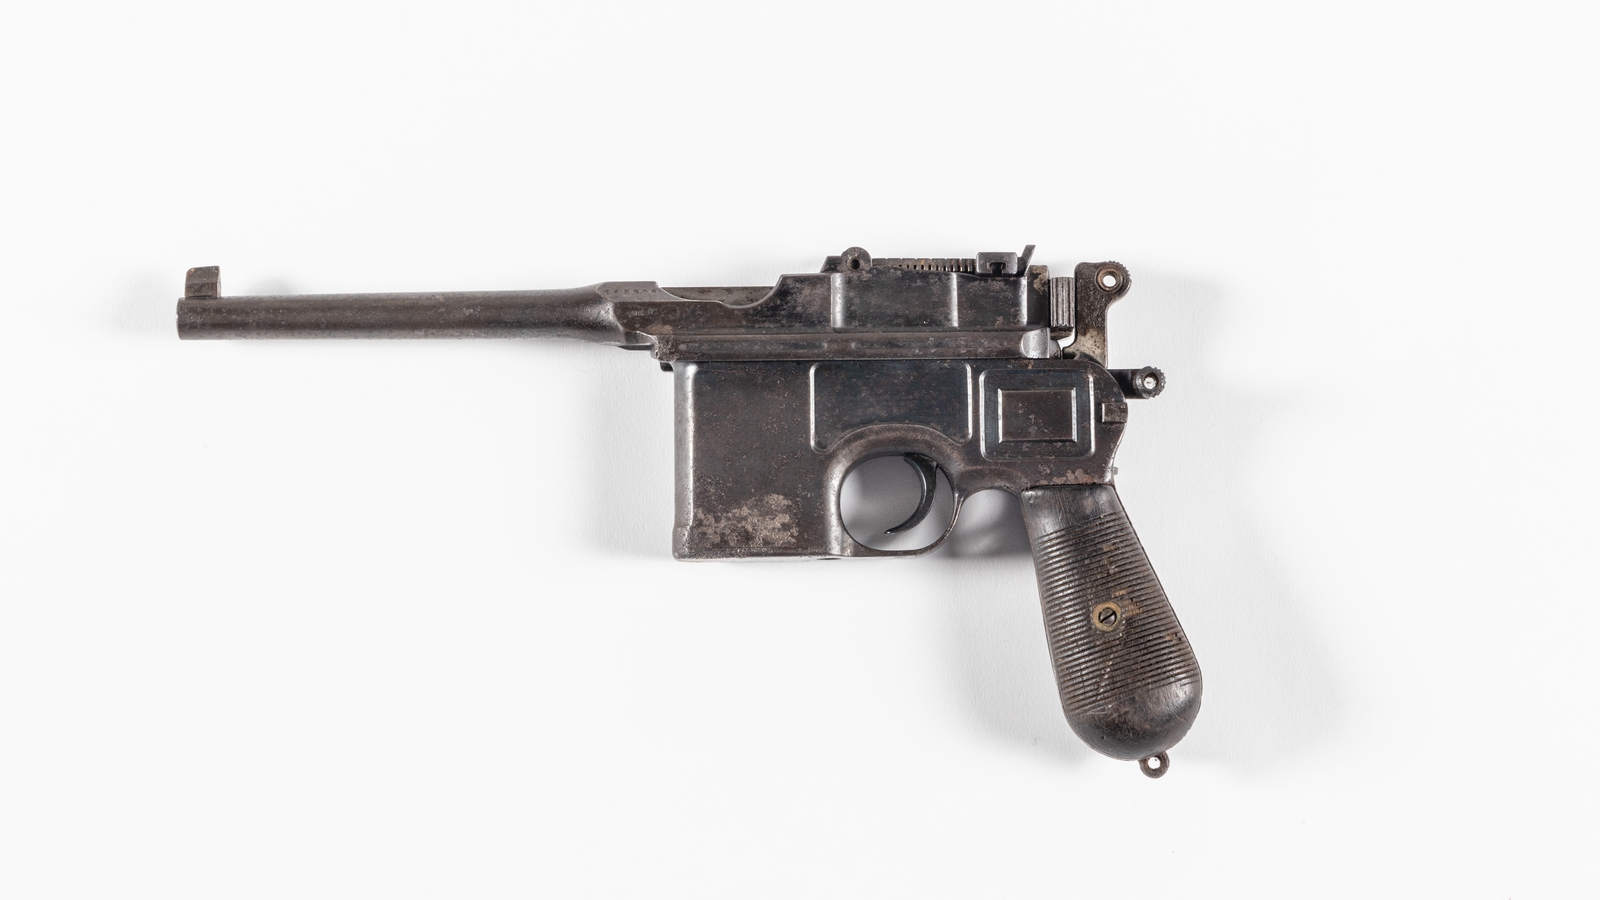 Image - FitzPatrick's Mauser pistol (Courtesy of Monaghan County Museum)